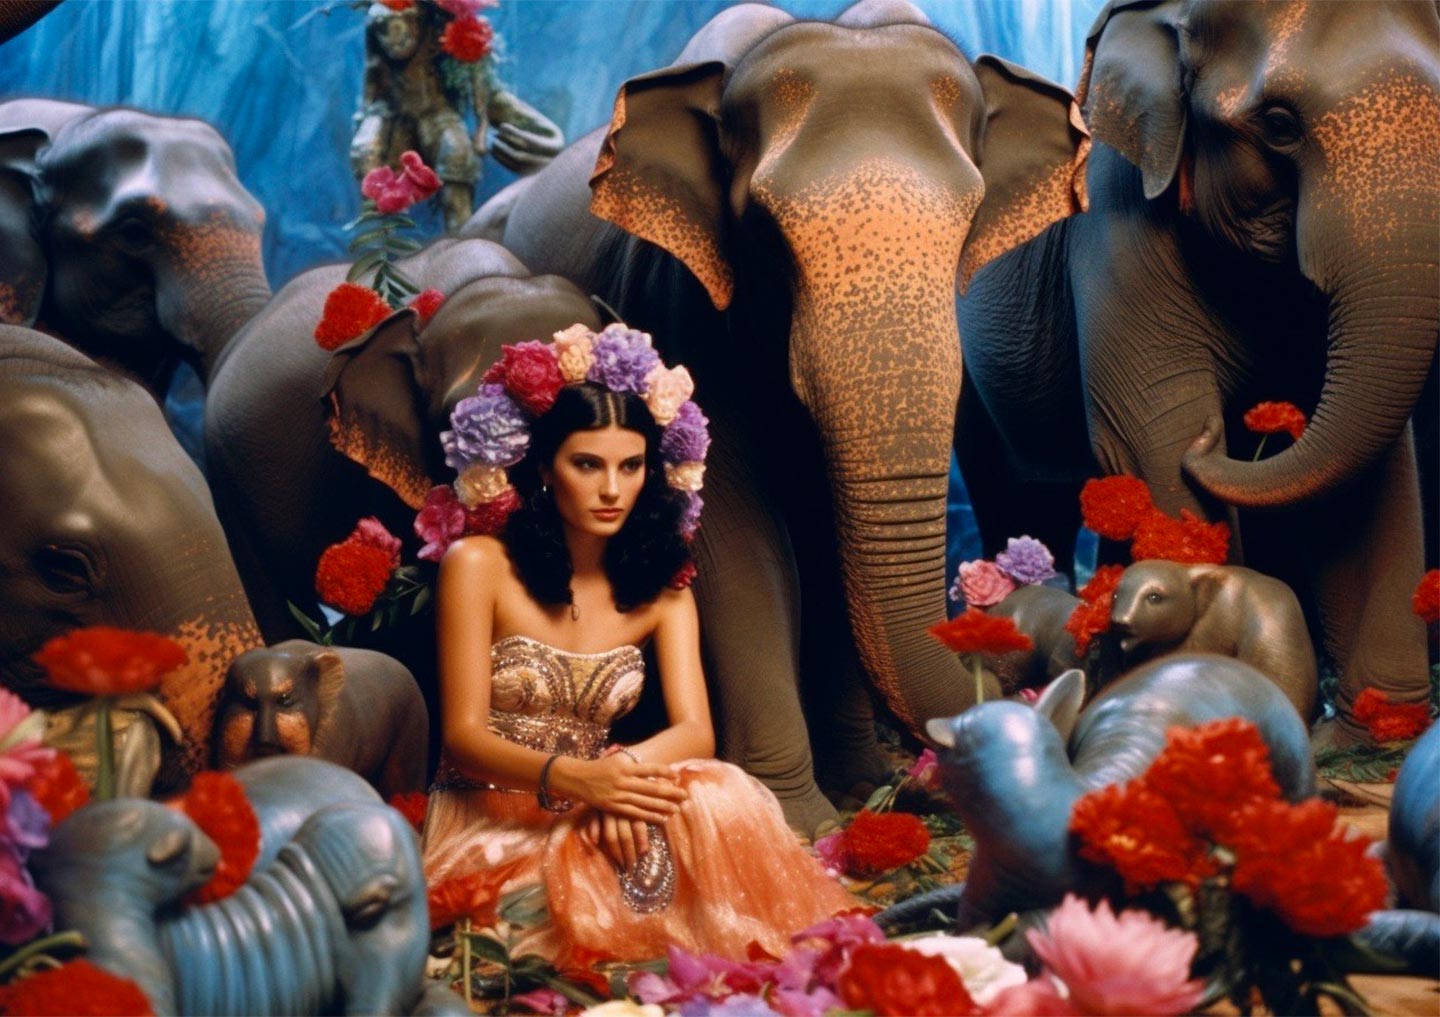 What if the iconic shot of Dovima with the Elephants had not been taken by Richard Avedon but by David LaChapelle with his hyper-real and slyly subversive style imbued with a kitschy pop surrealism? MidJourney believes this to be the outcome